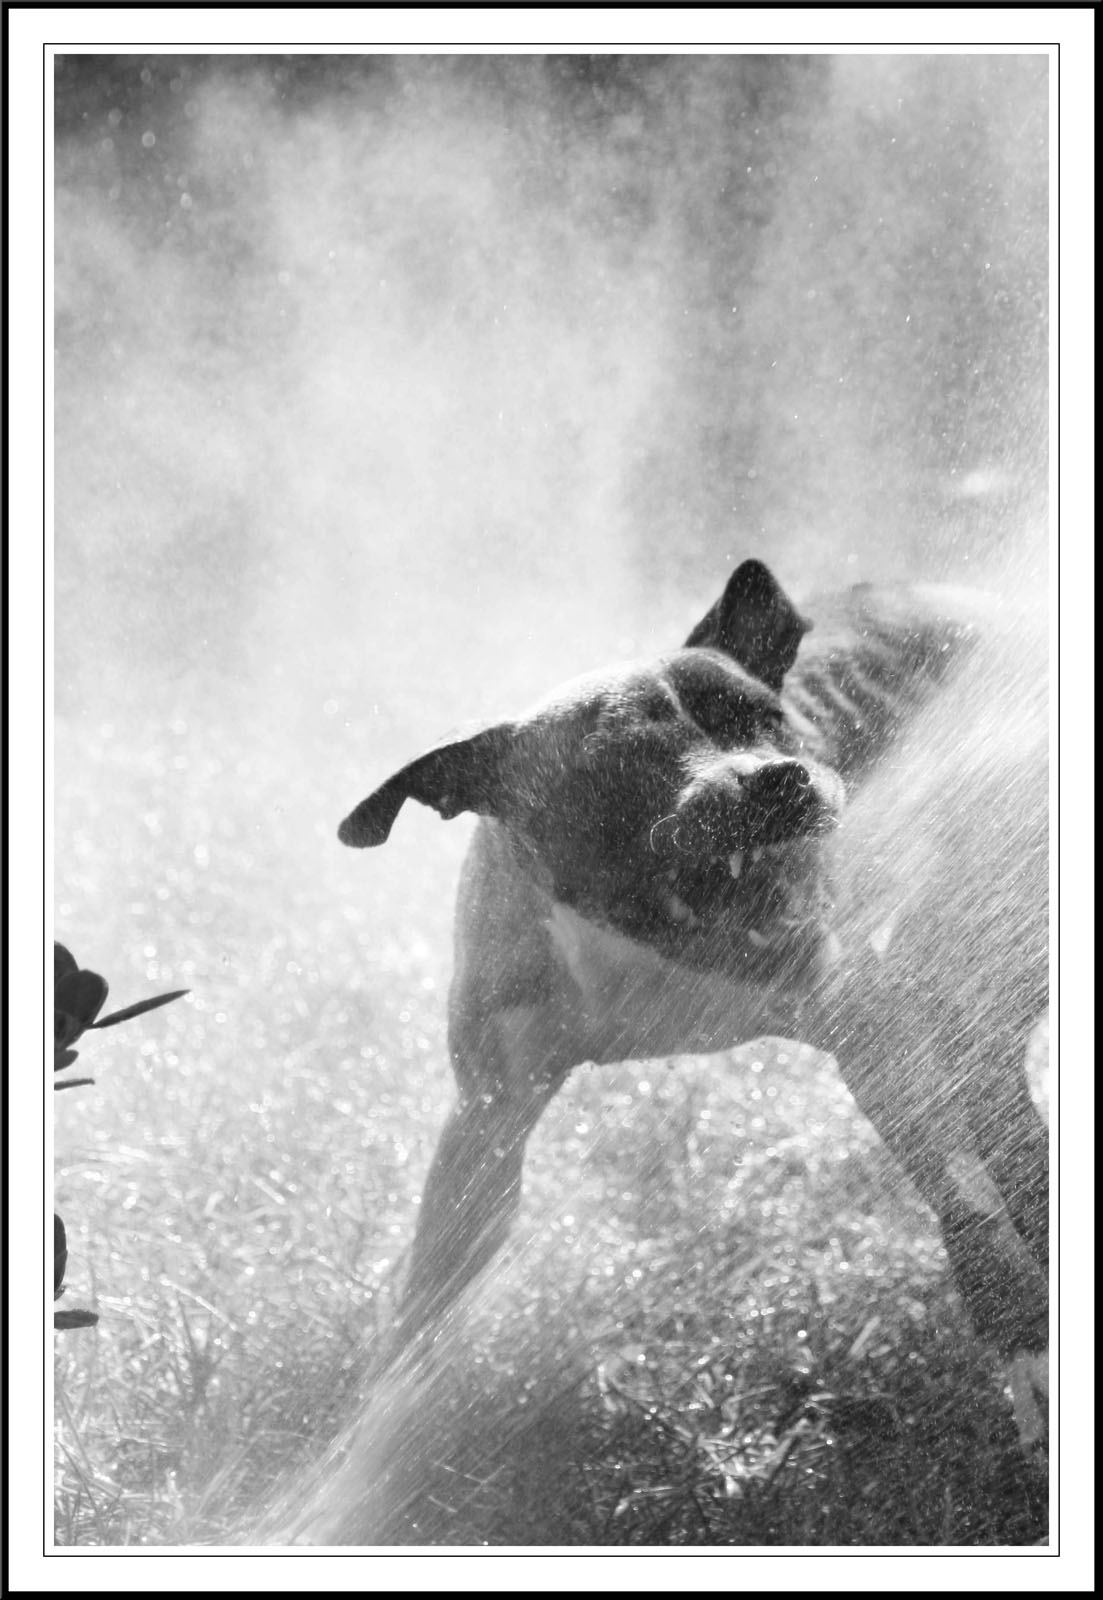 Pit bull attacking water photo